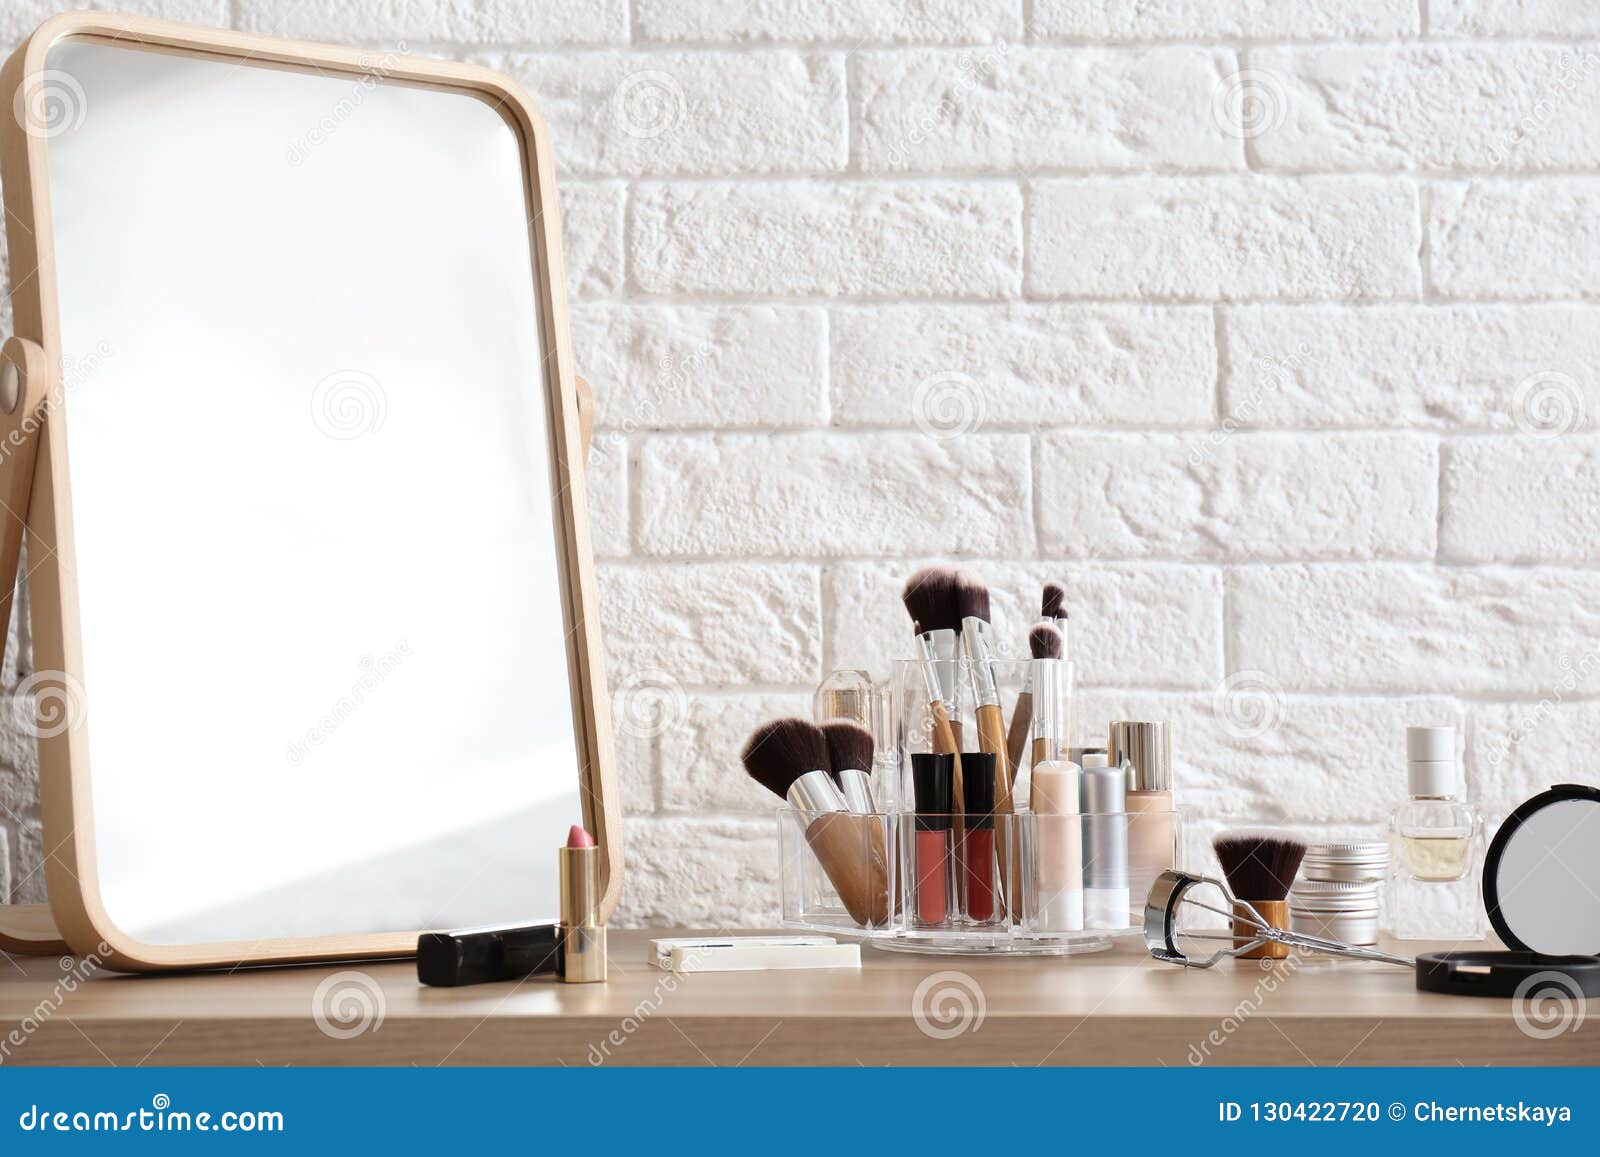 Organizer With Cosmetic Products For Makeup On Table Stock Photo